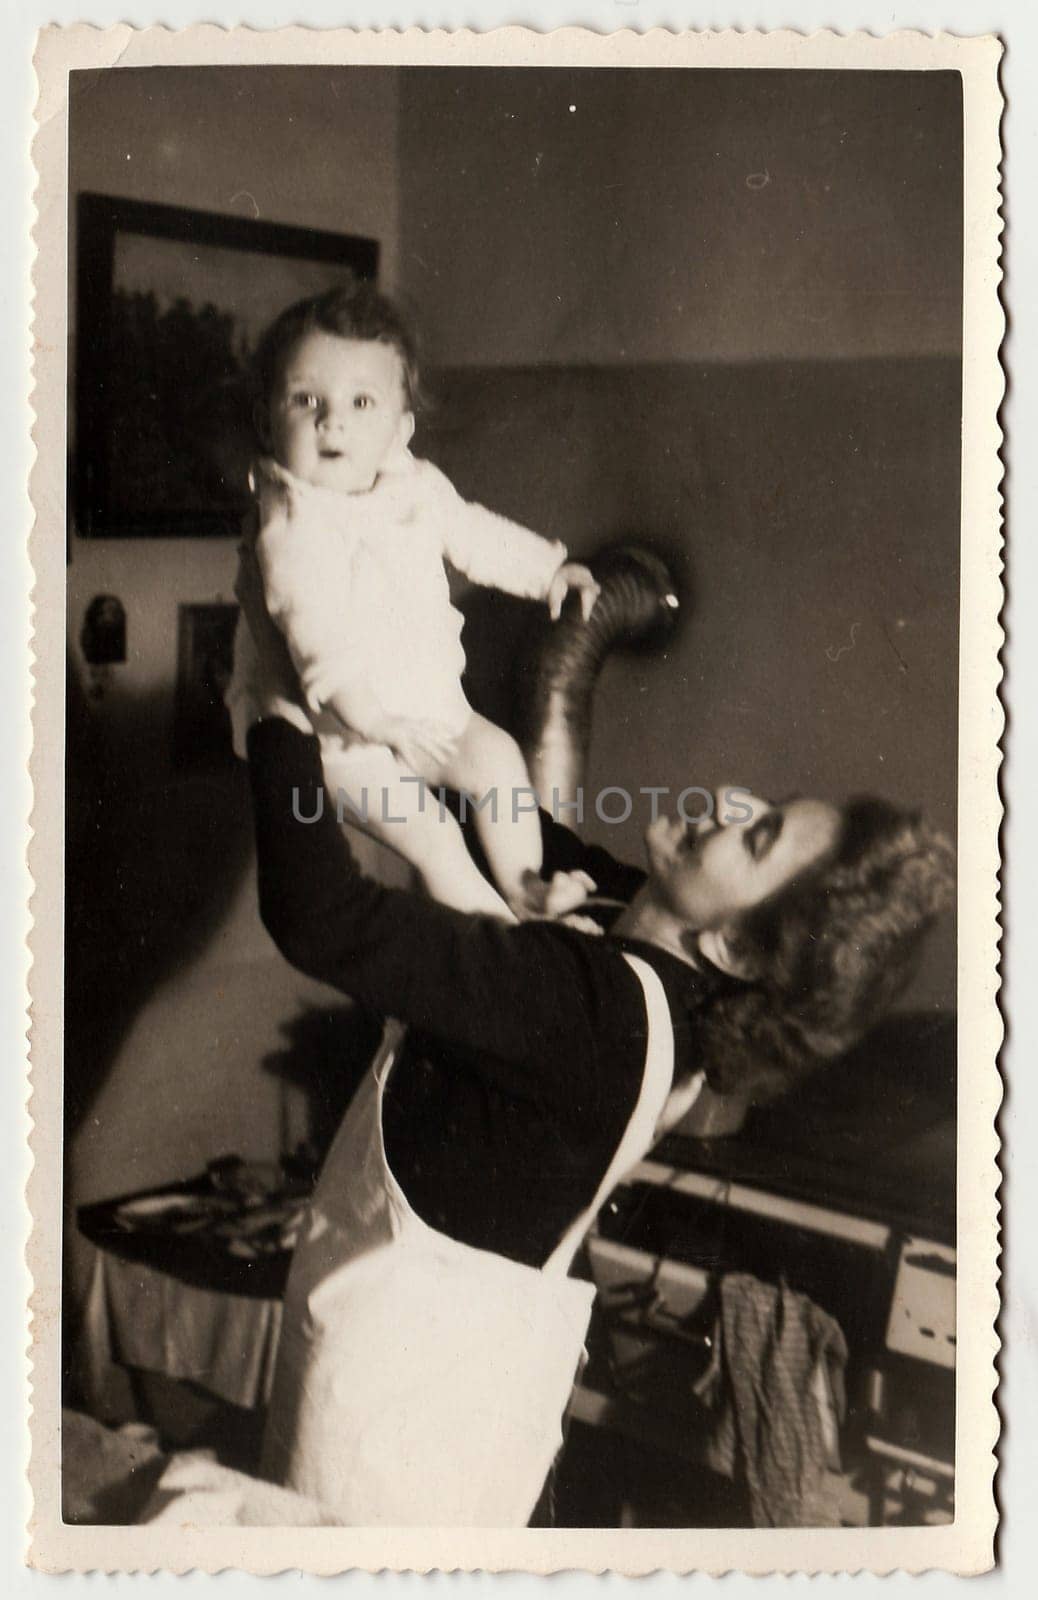 Vintage photo shows a small girl with her mother, circa 1941. by roman_nerud